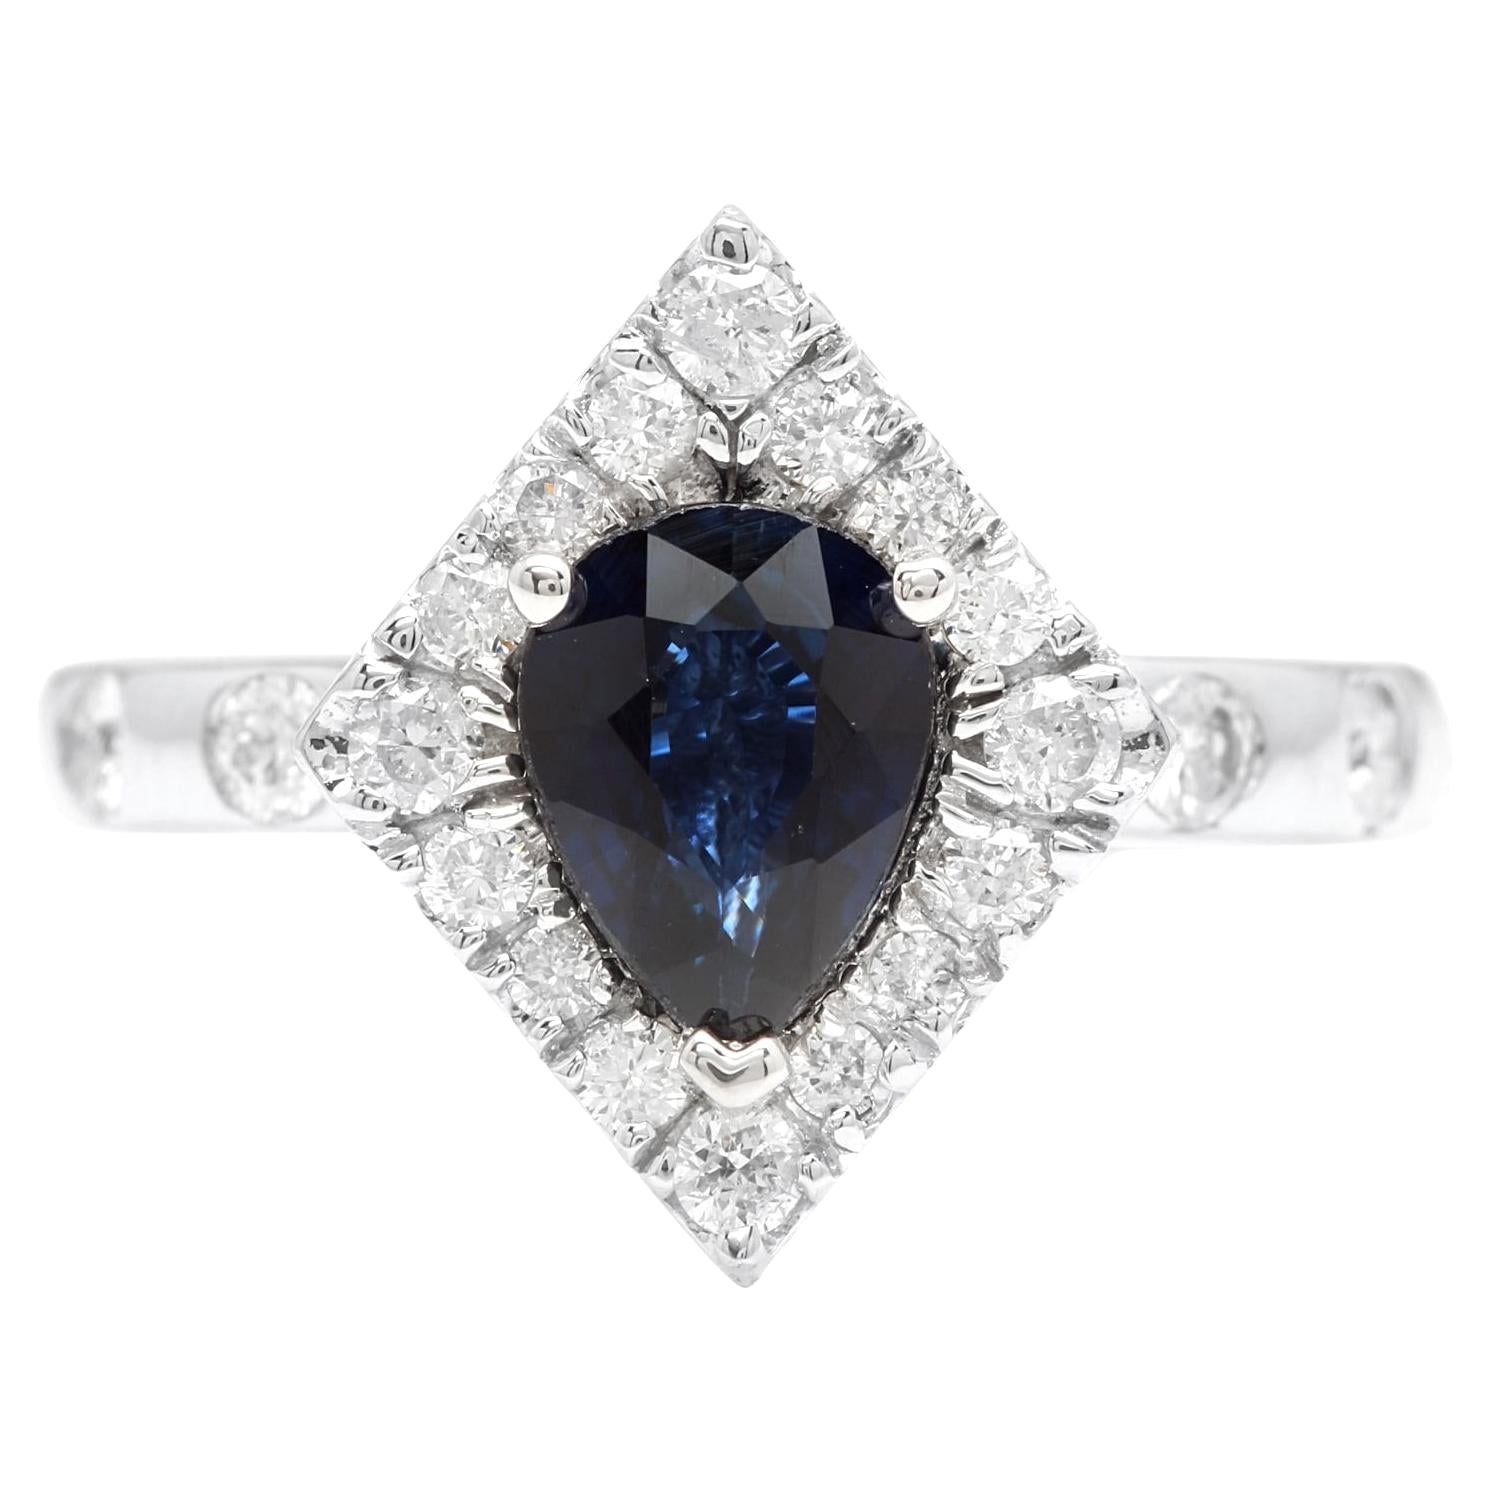 2.15 Carats Exquisite Natural Blue Sapphire and Diamond 14K Solid White Gold Rin